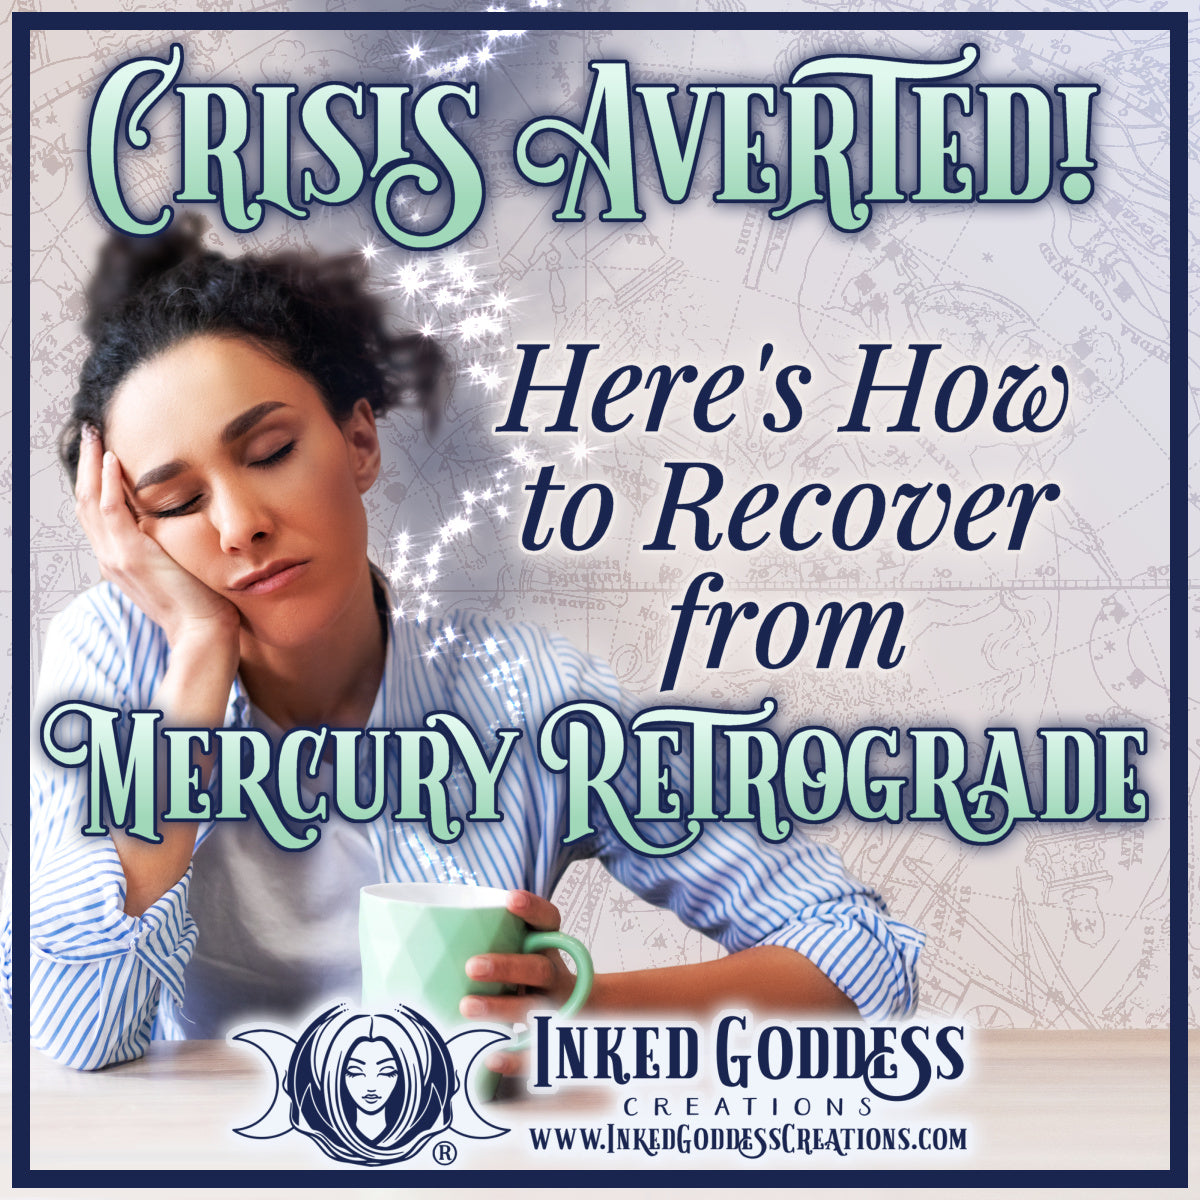 Crisis Averted! Here's How to Recover from Mercury Retrograde